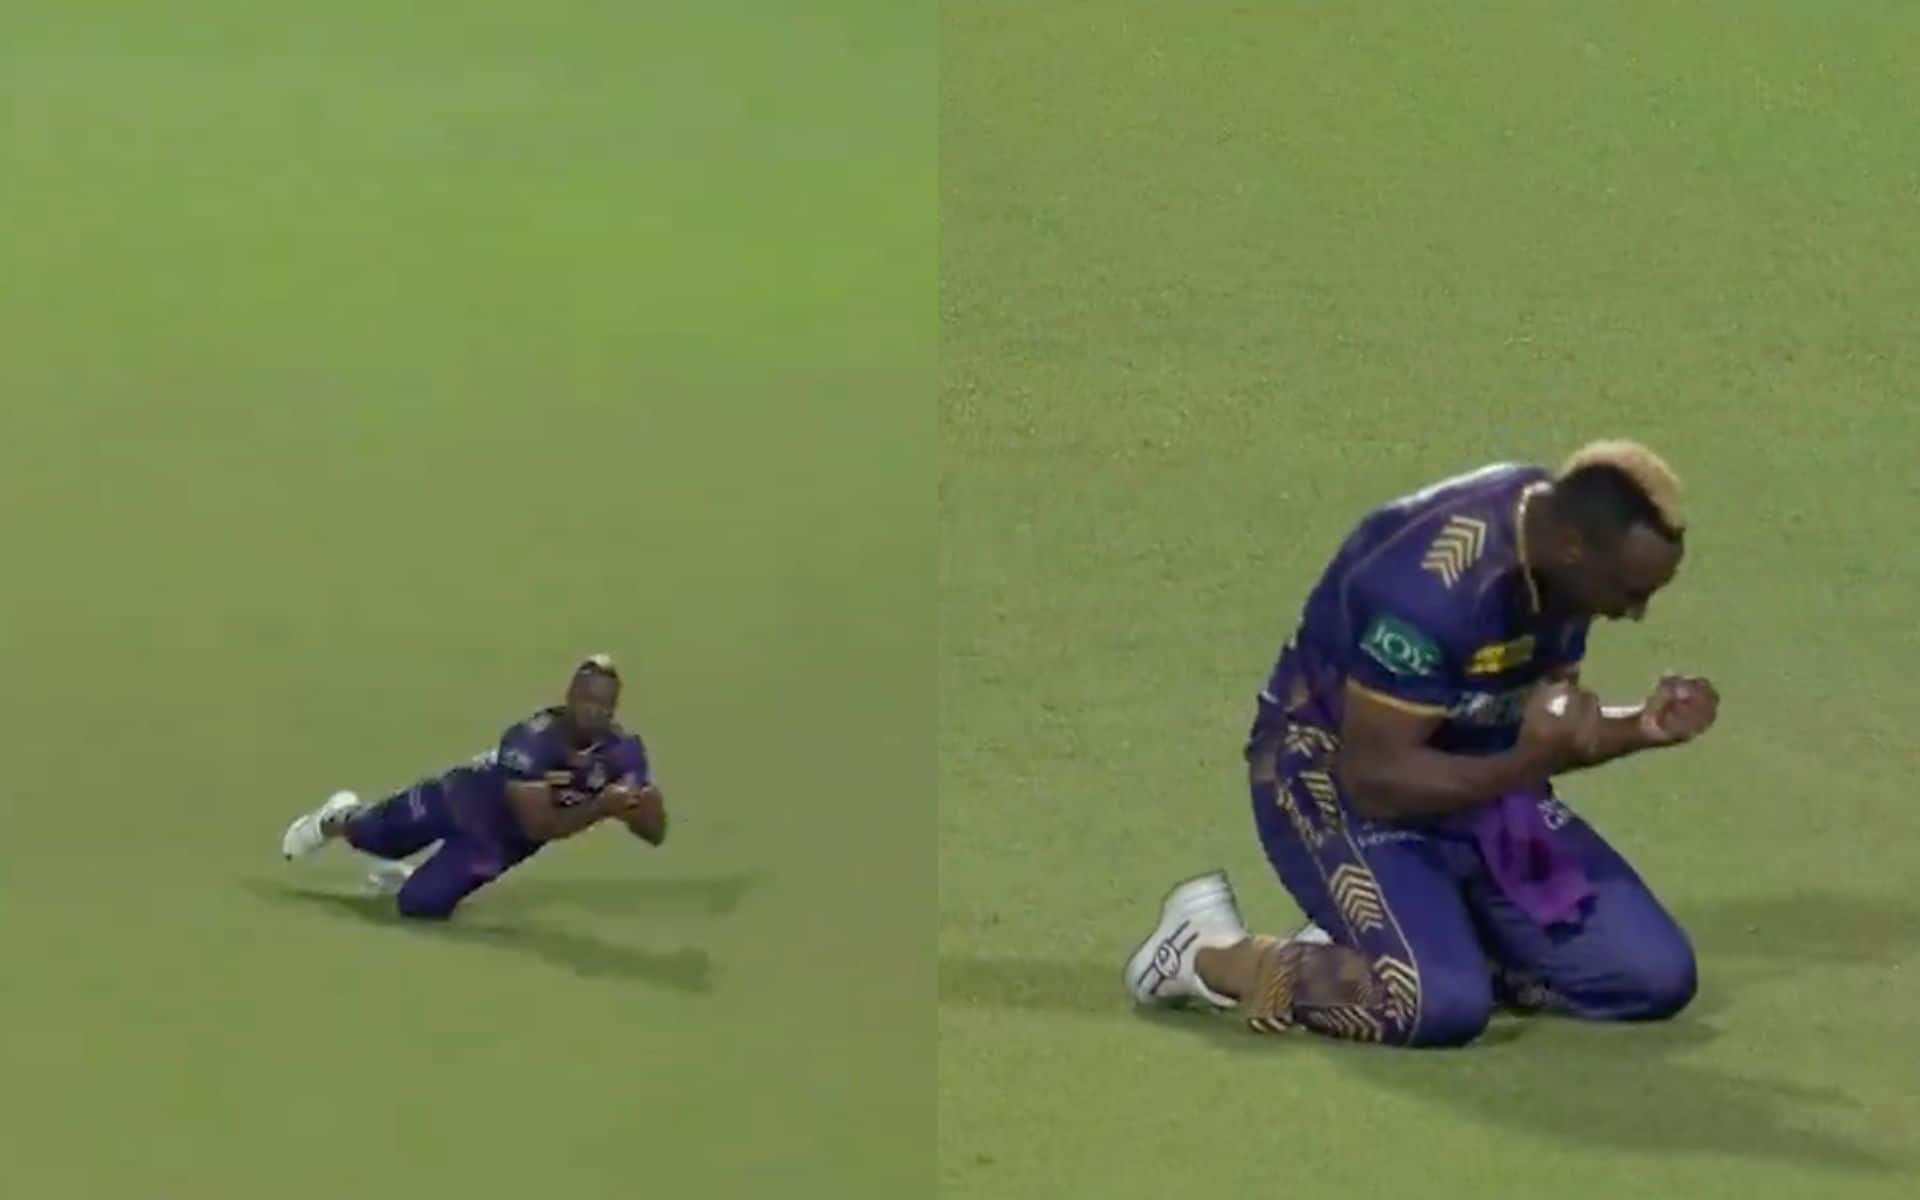 Russell's wild celebration after Parag's catch (X.com)